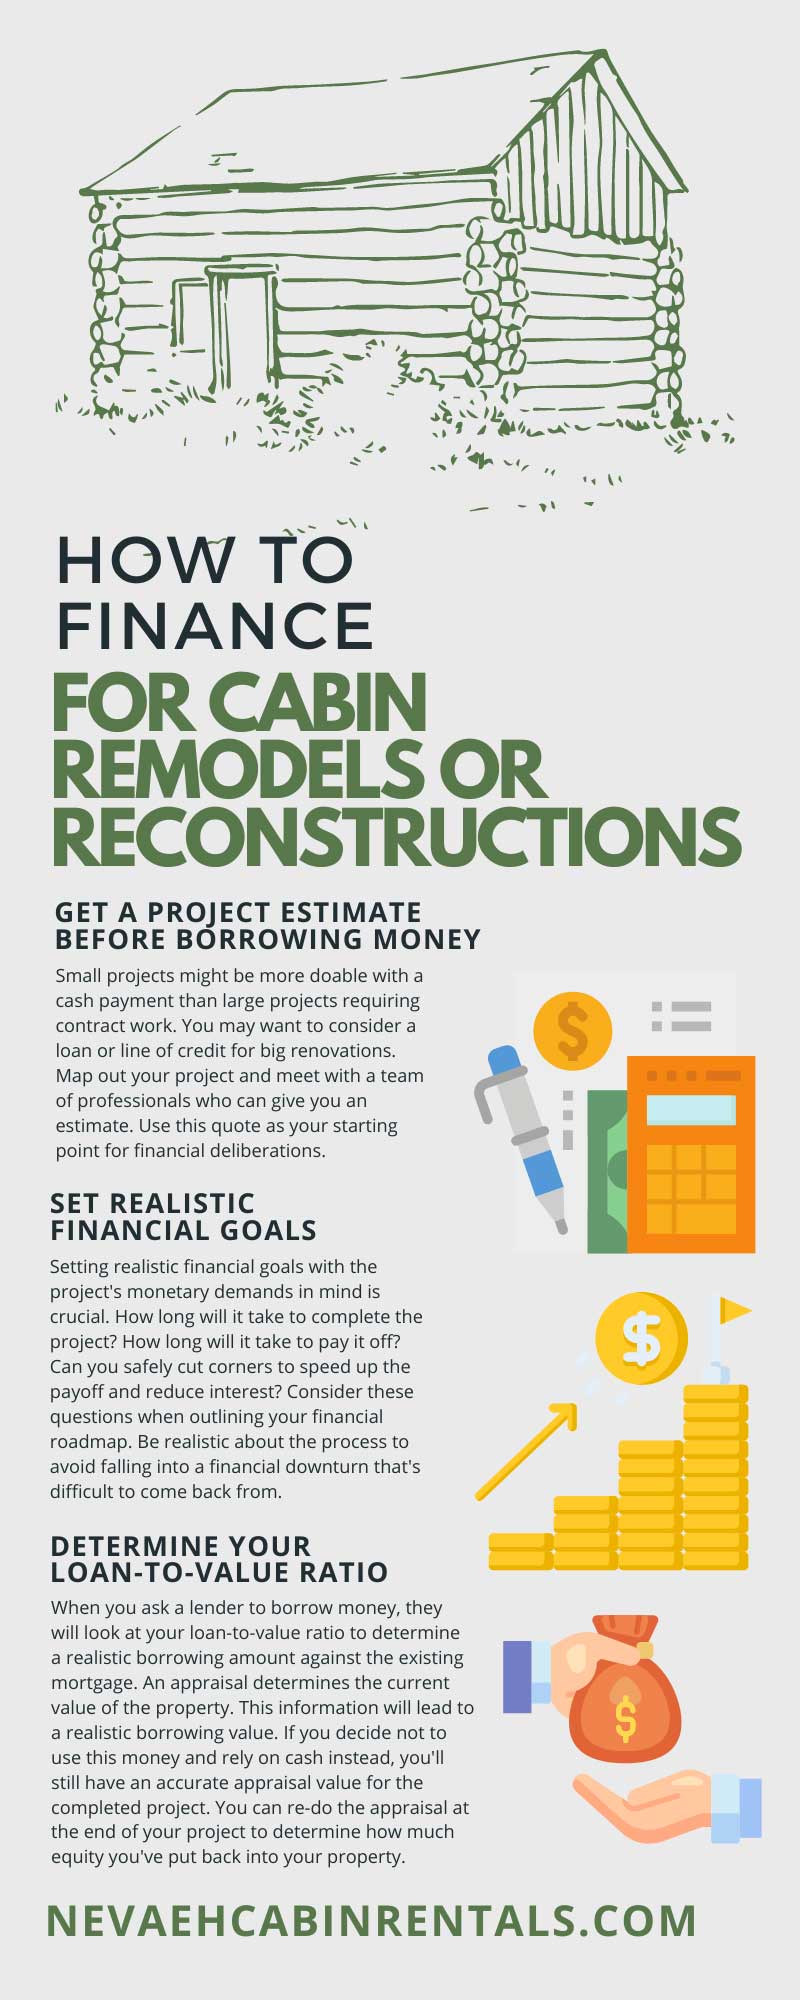 How To Finance for Cabin Remodels or Reconstructions